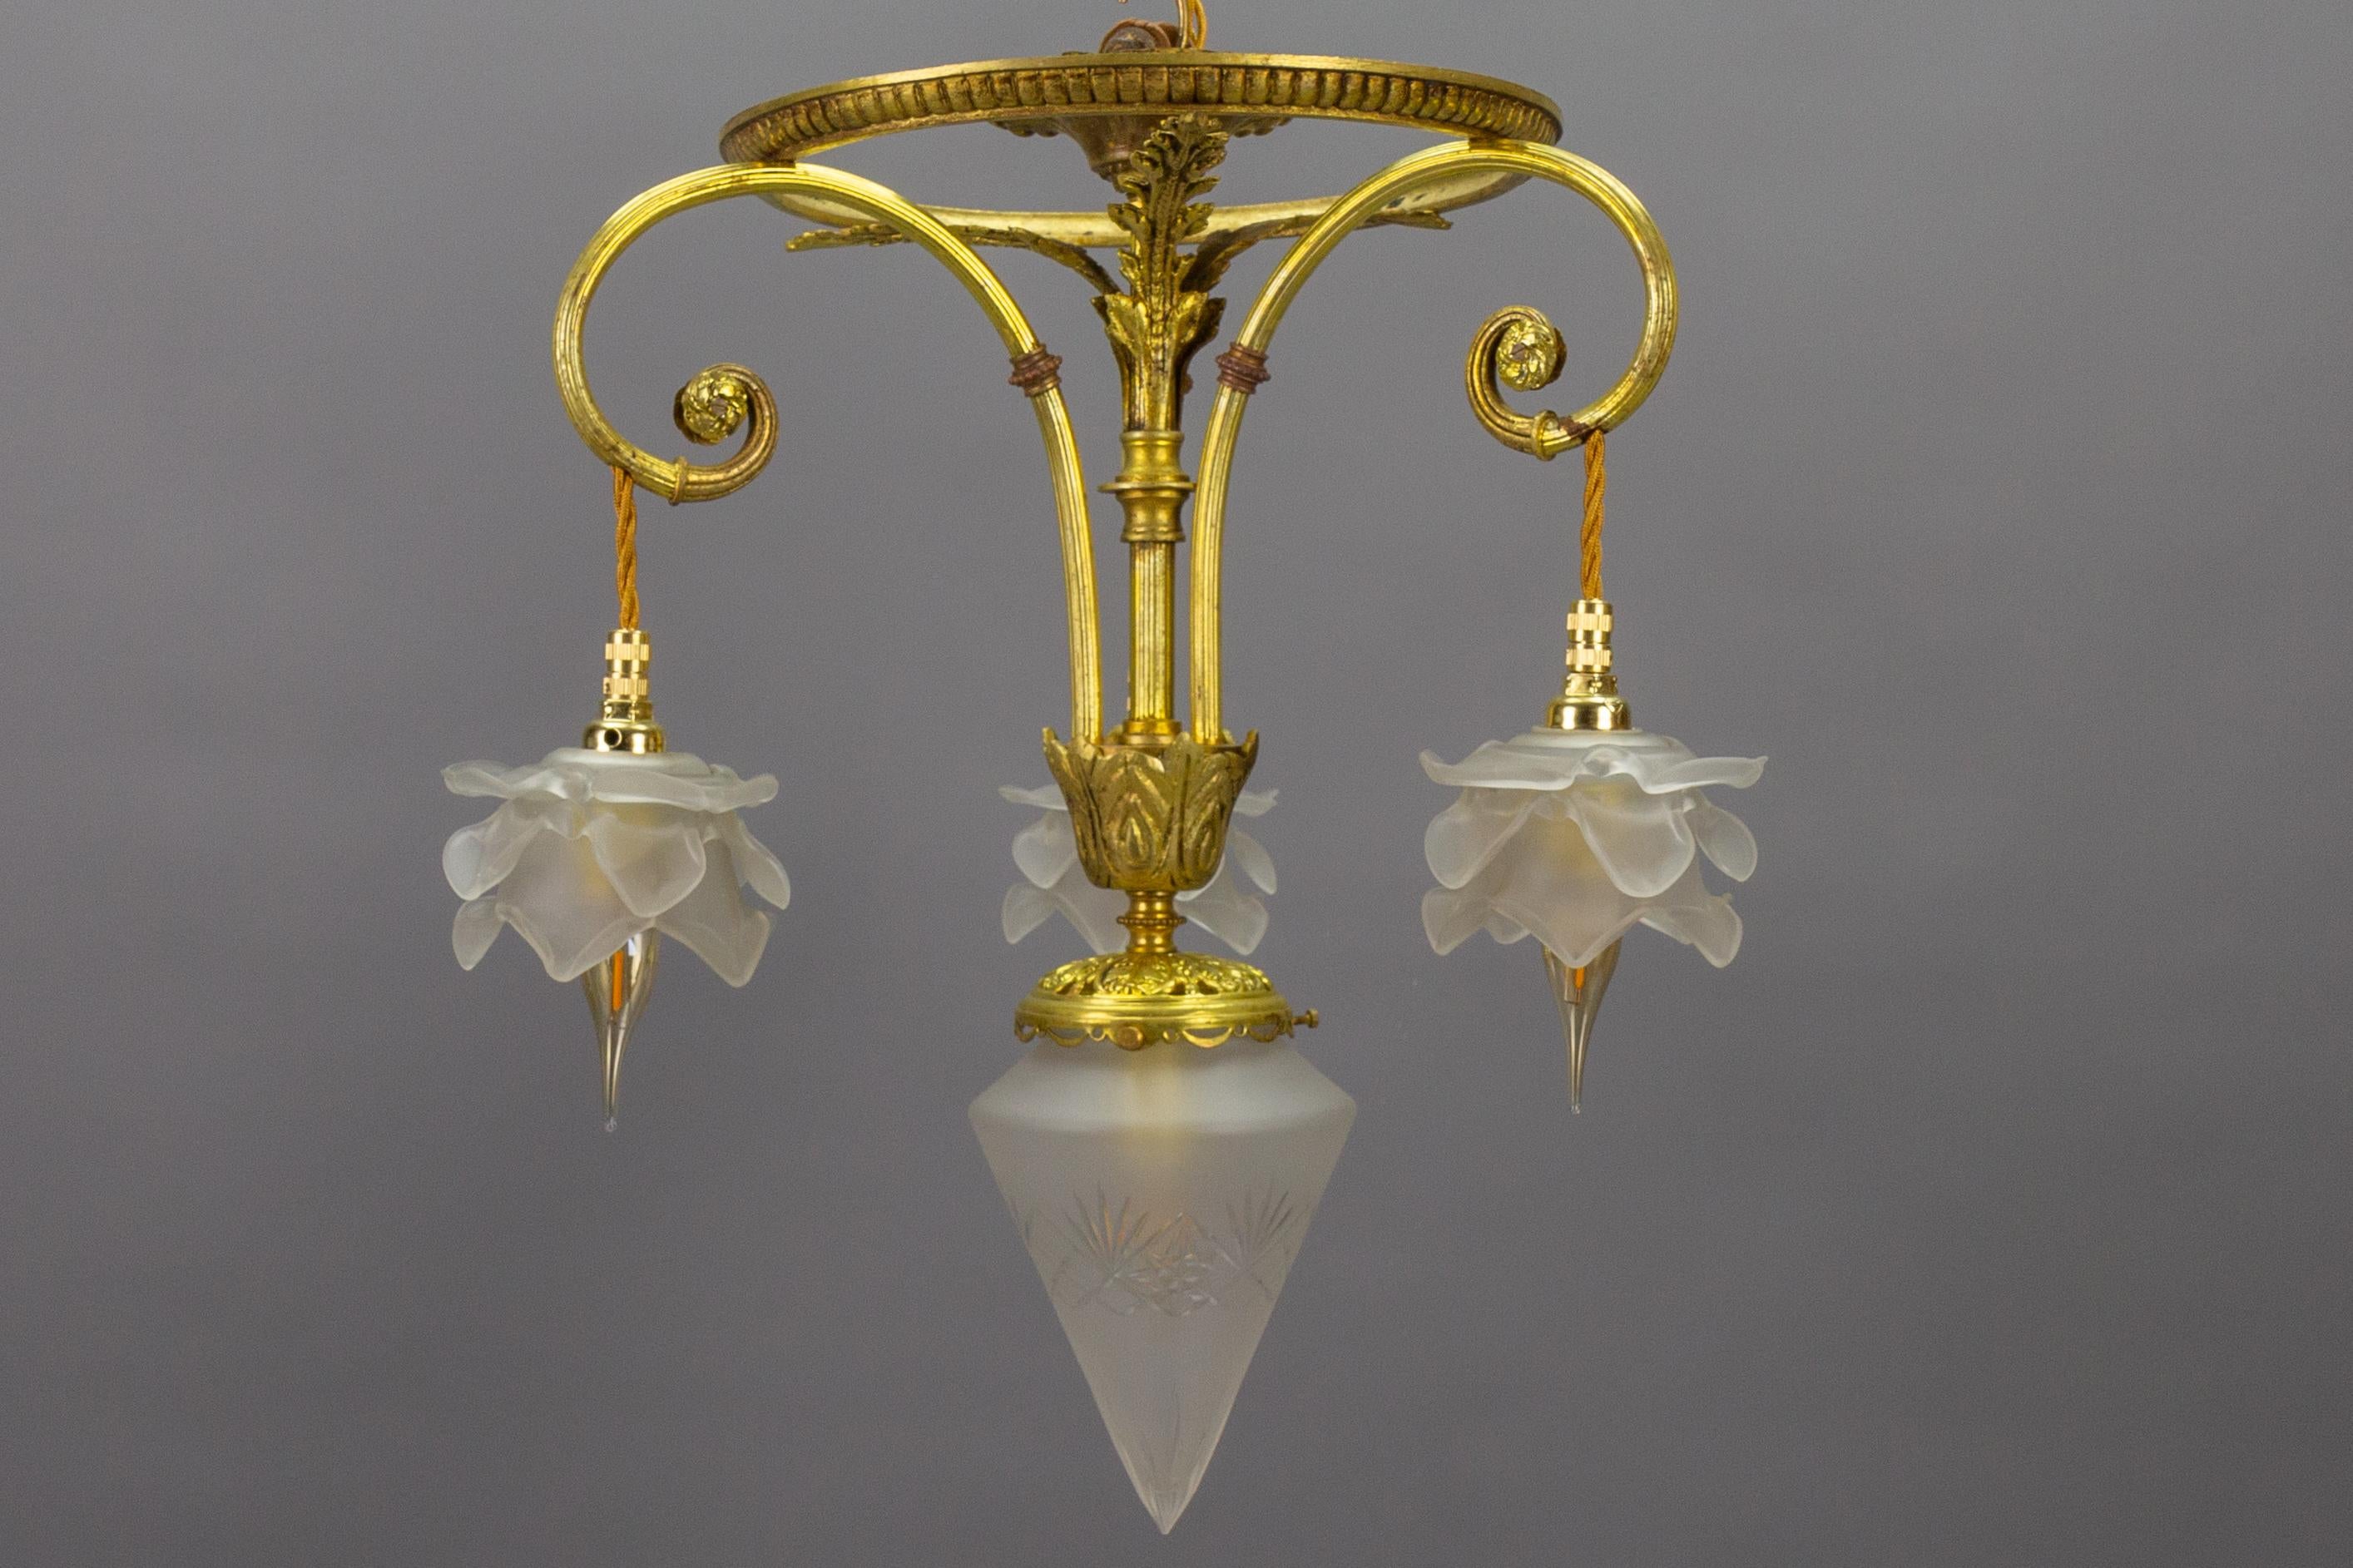 French Louis XVI style bronze and frosted cut glass four-light pendant chandelier from circa 1920s.
This adorable Neoclassical or Louis XVI-style bronze chandelier is adorned with scrolls, and acanthus leaves and features three beautifully shaped